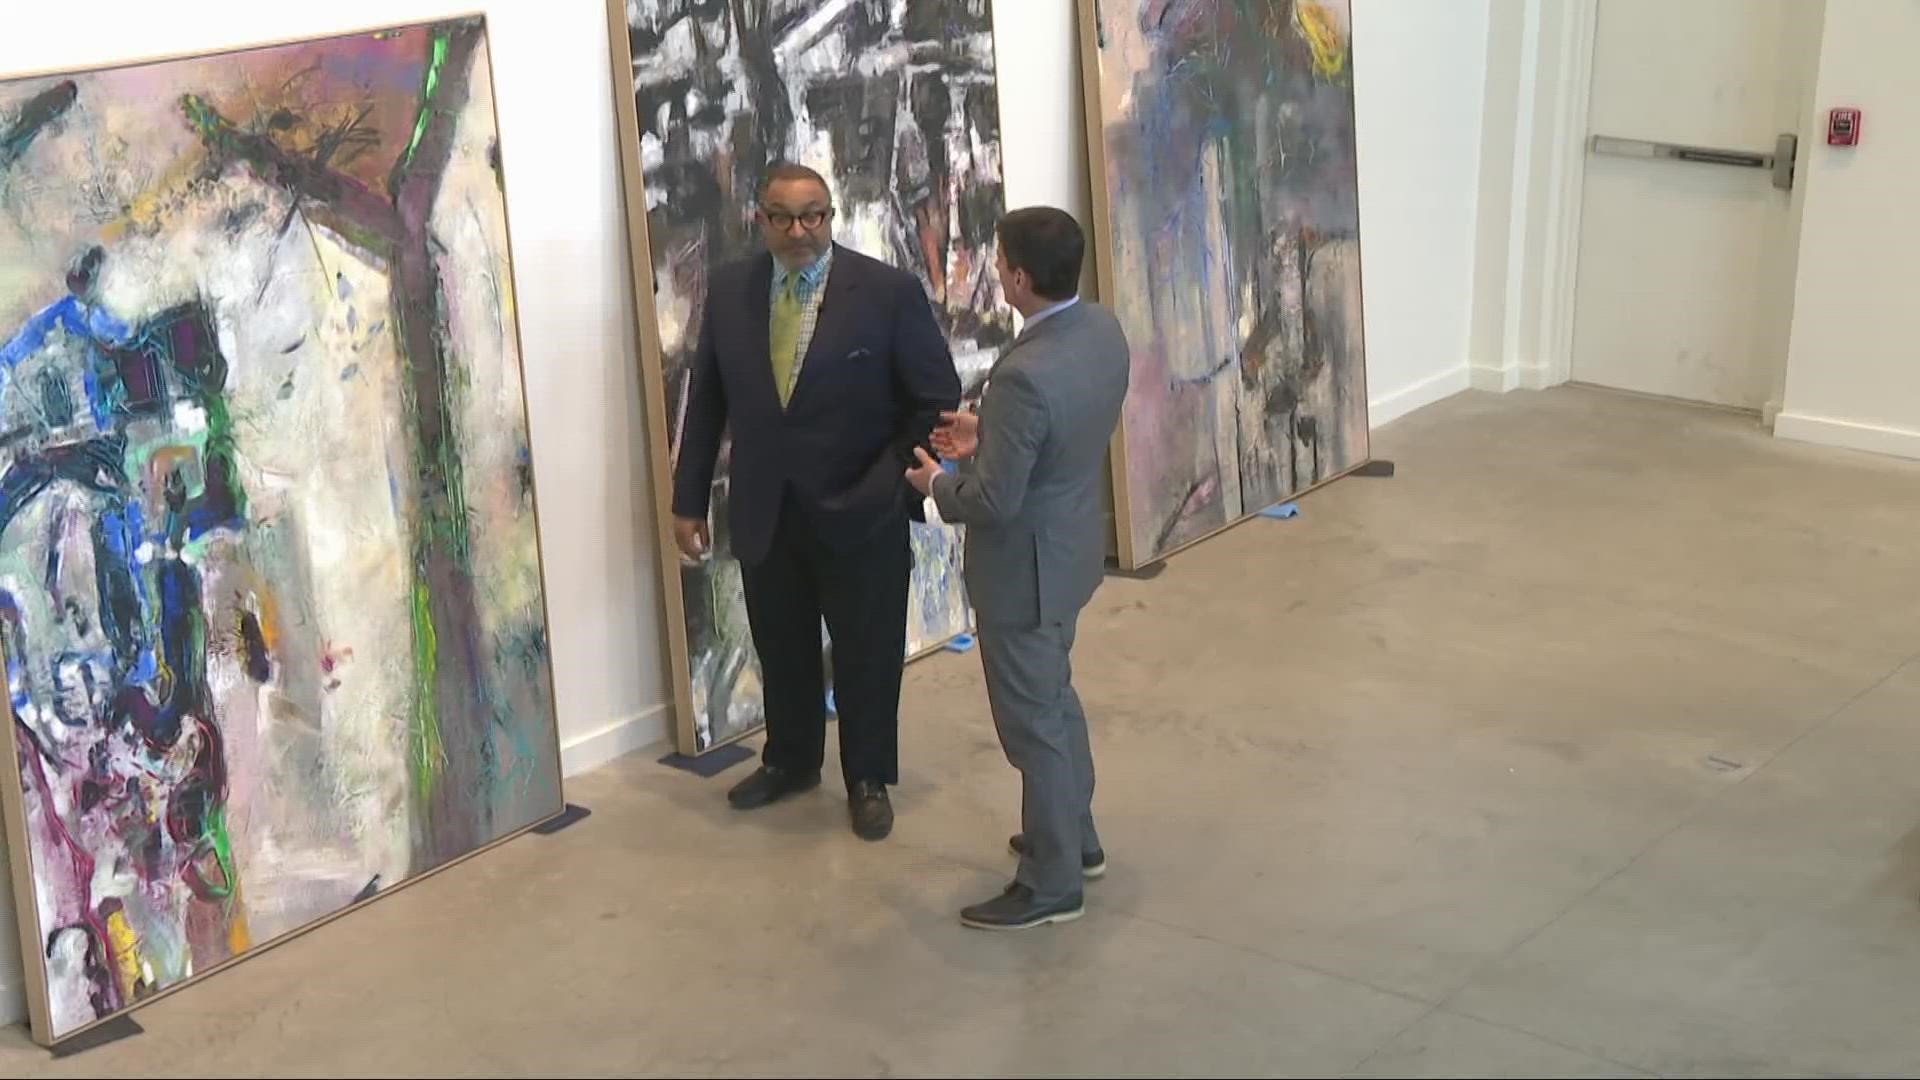 In this edition of Game Changers with 3News' Dave Chudowsky, we focus on growing Cleveland's creative industries with Assembly for the Arts CEO Jeremy Johnson.